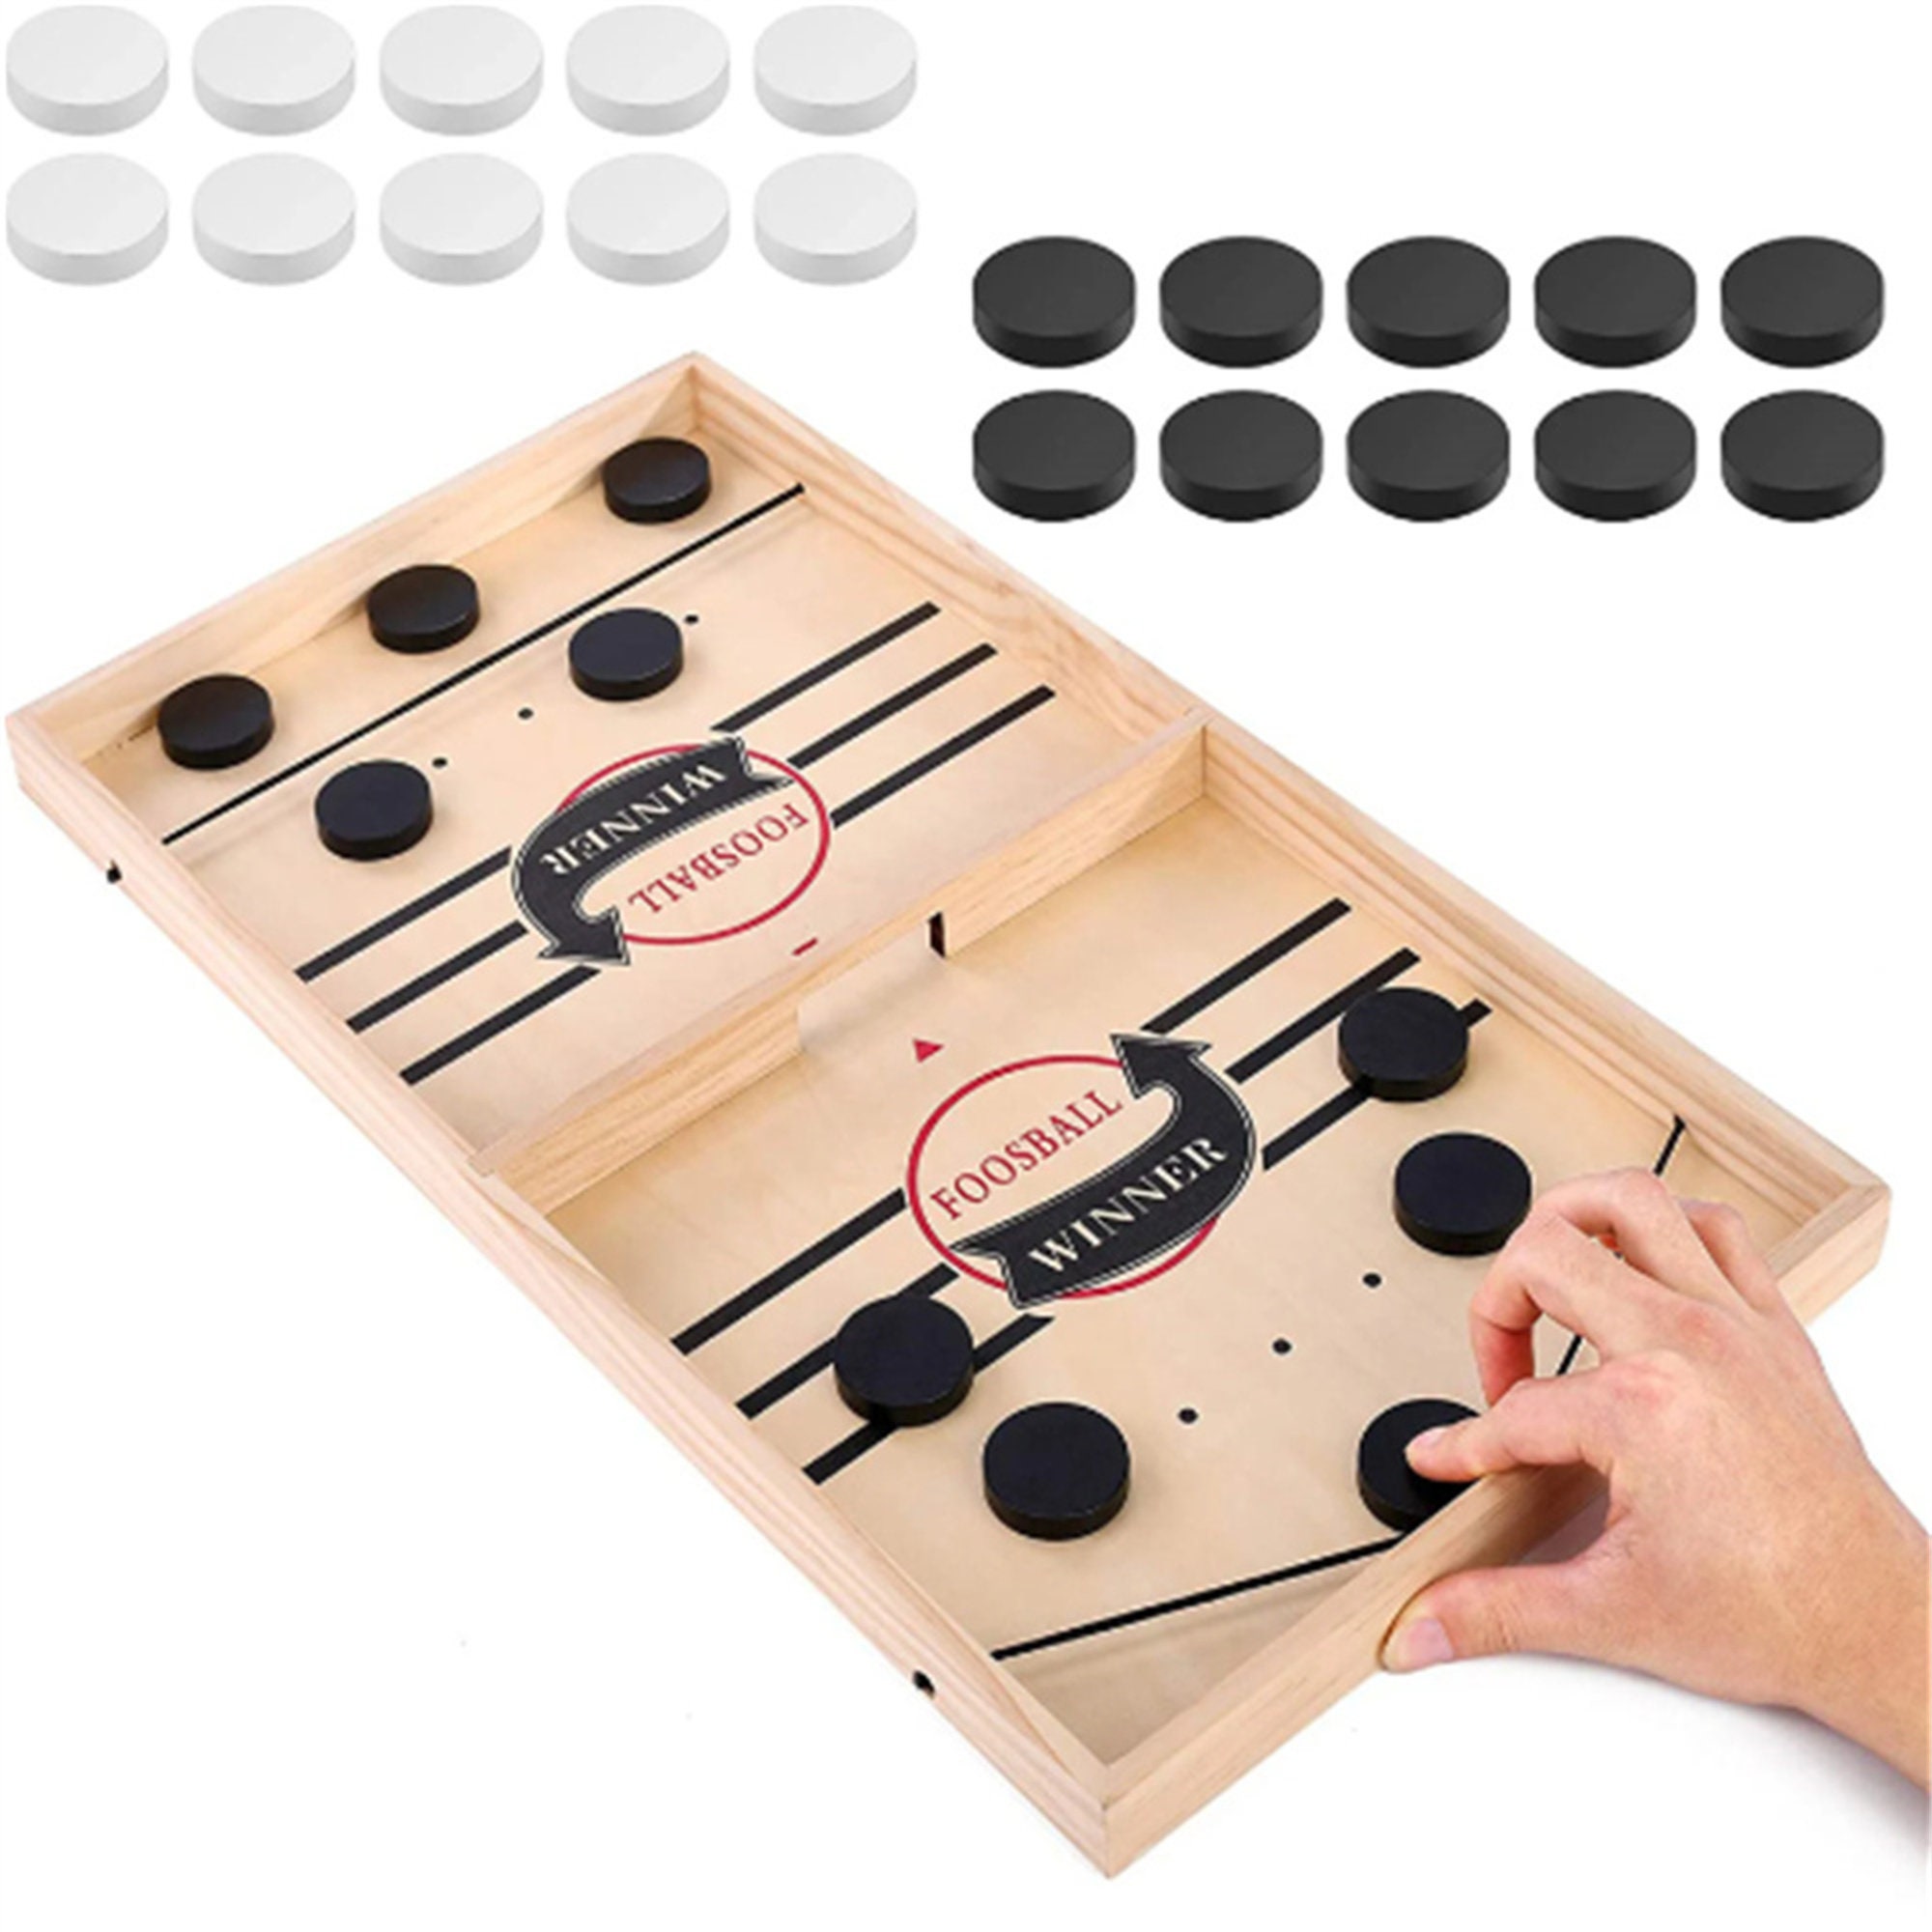 Fast Slingshot Table Hockey Party Game，Wood Tables Family Games to Play and a Classic Game for Living Room Rustic Table Game Guest Room Strategy Board Games Winner Board Games Toys for Parent-Child 